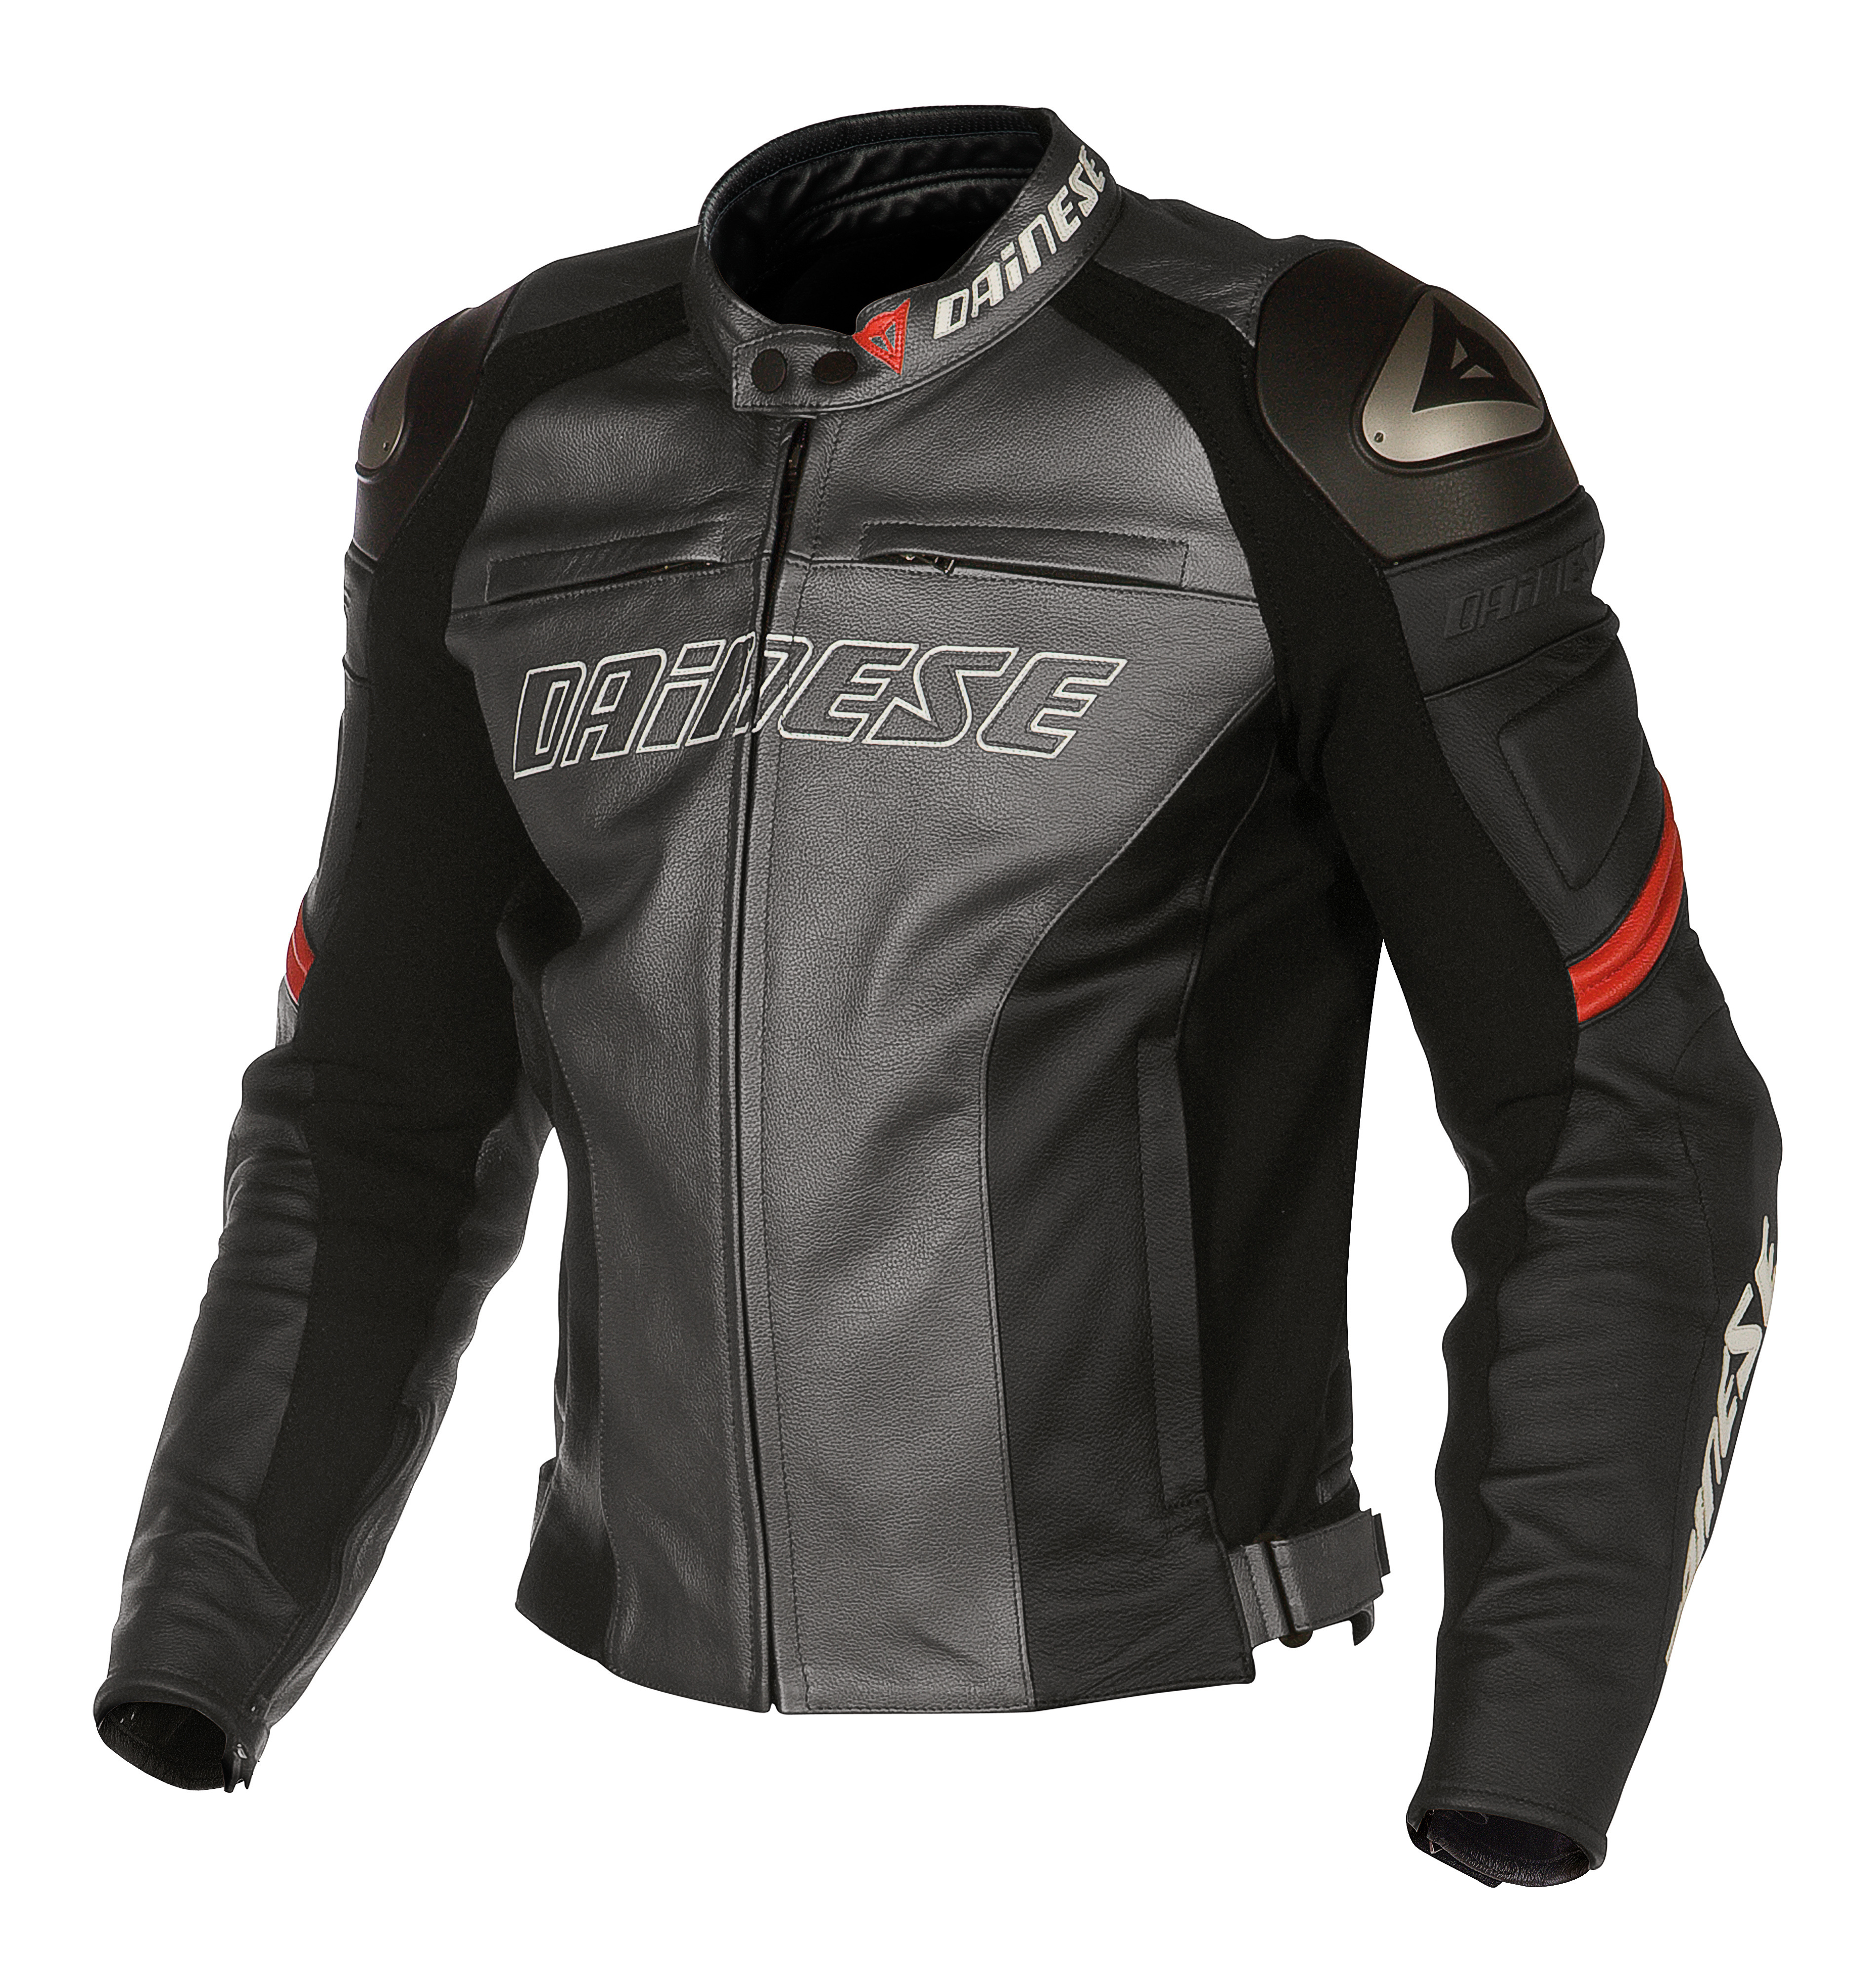 New: Dainese leather jacket 2014 collection